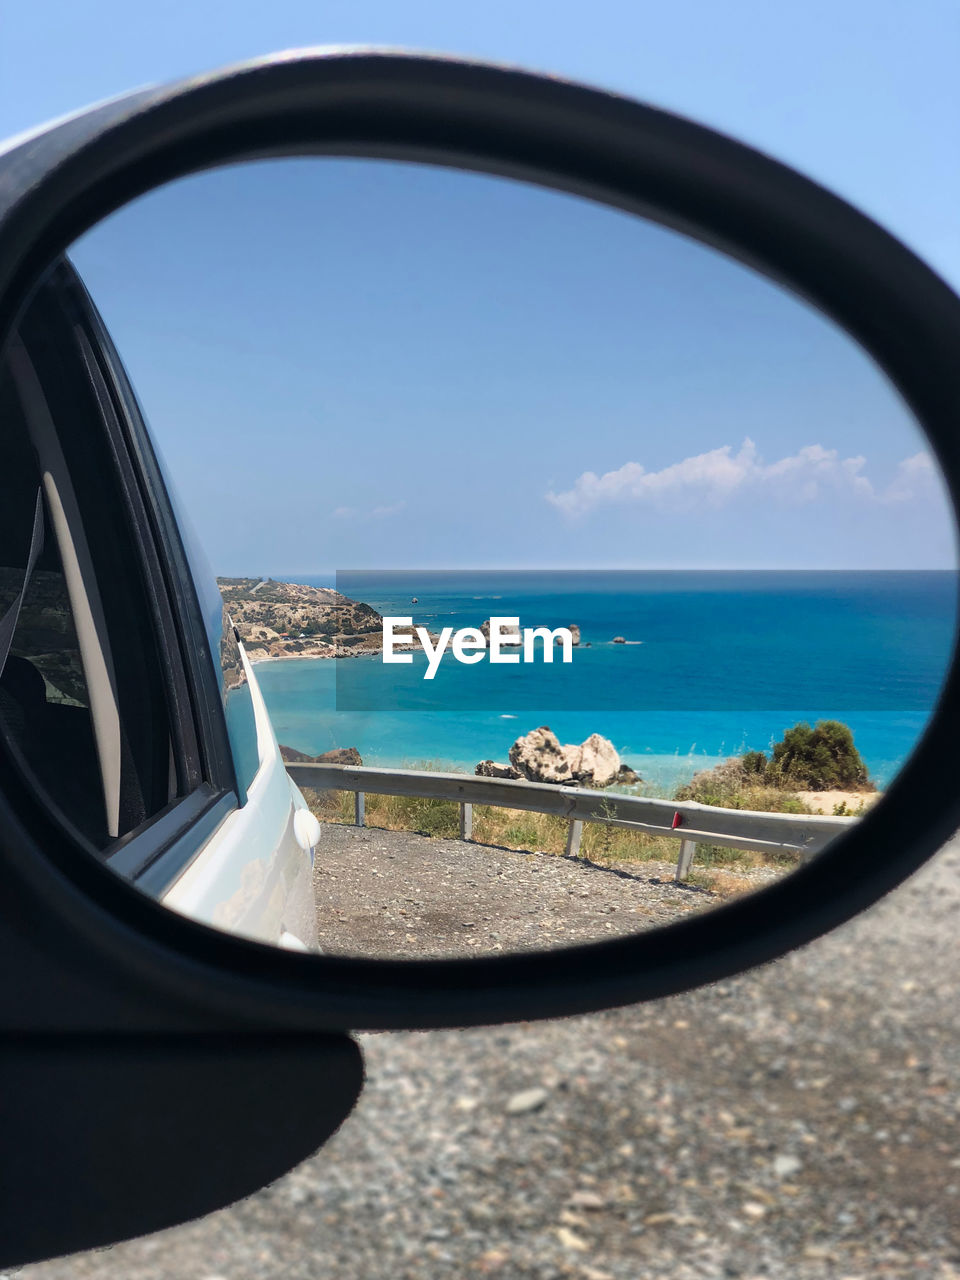 SCENIC VIEW OF SEA SEEN THROUGH WINDSHIELD